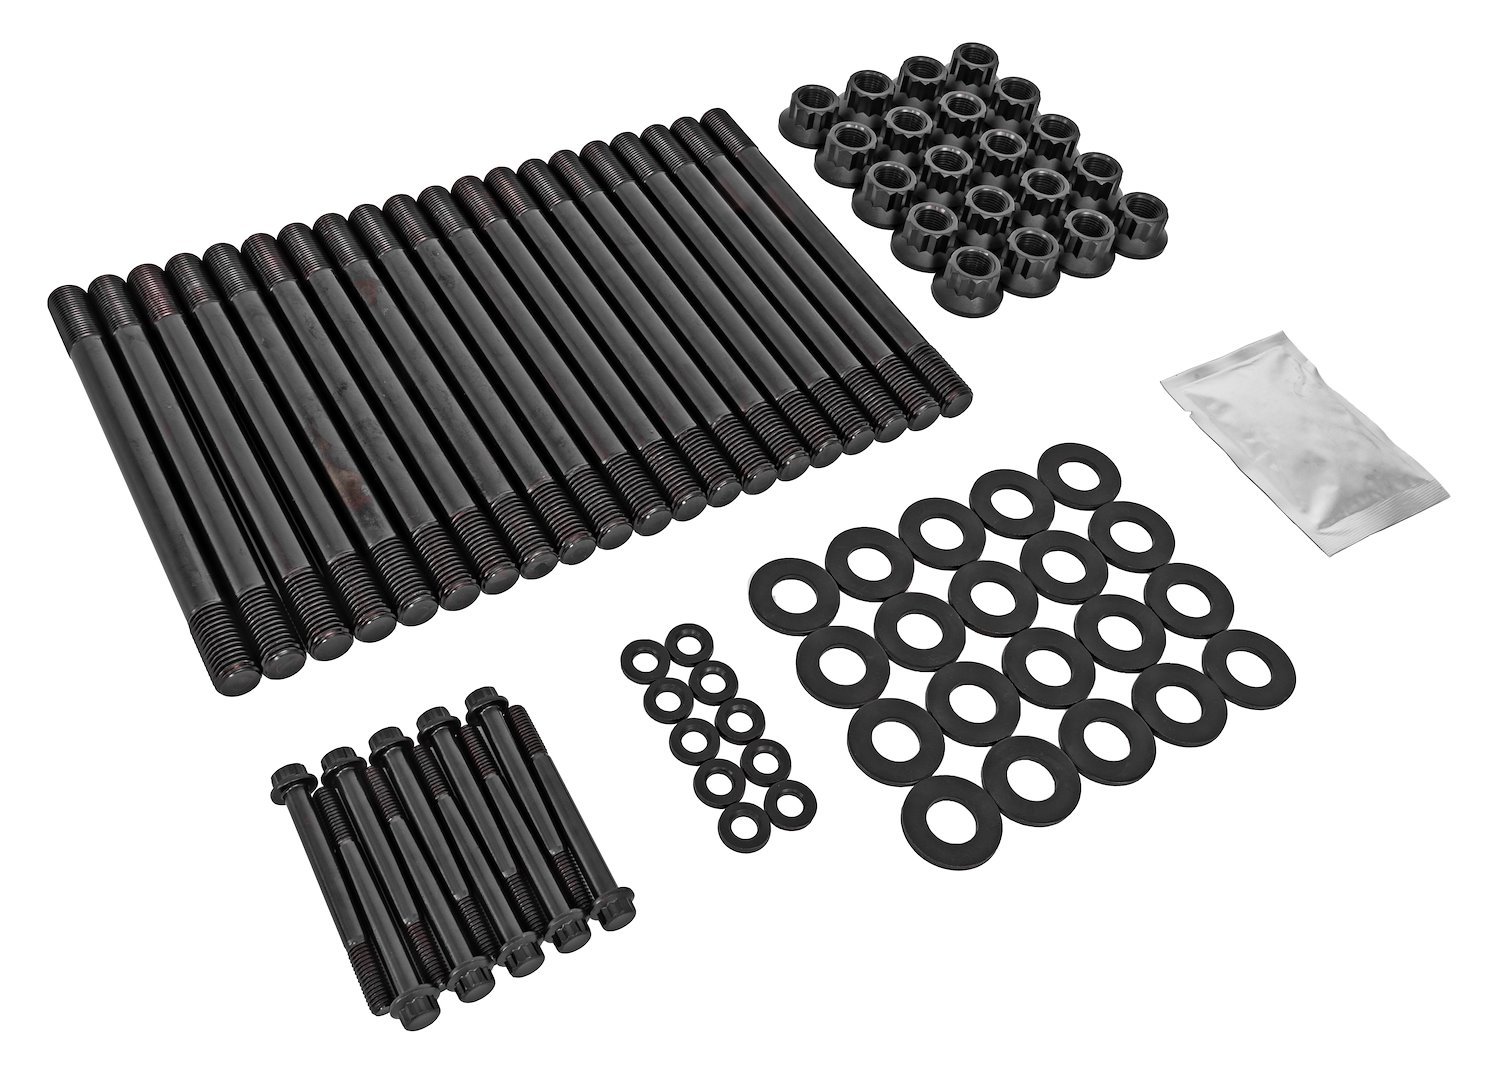 Cylinder Head Stud Kit for 2008-2010 Ford 6.4L Powerstroke Diesel Engines